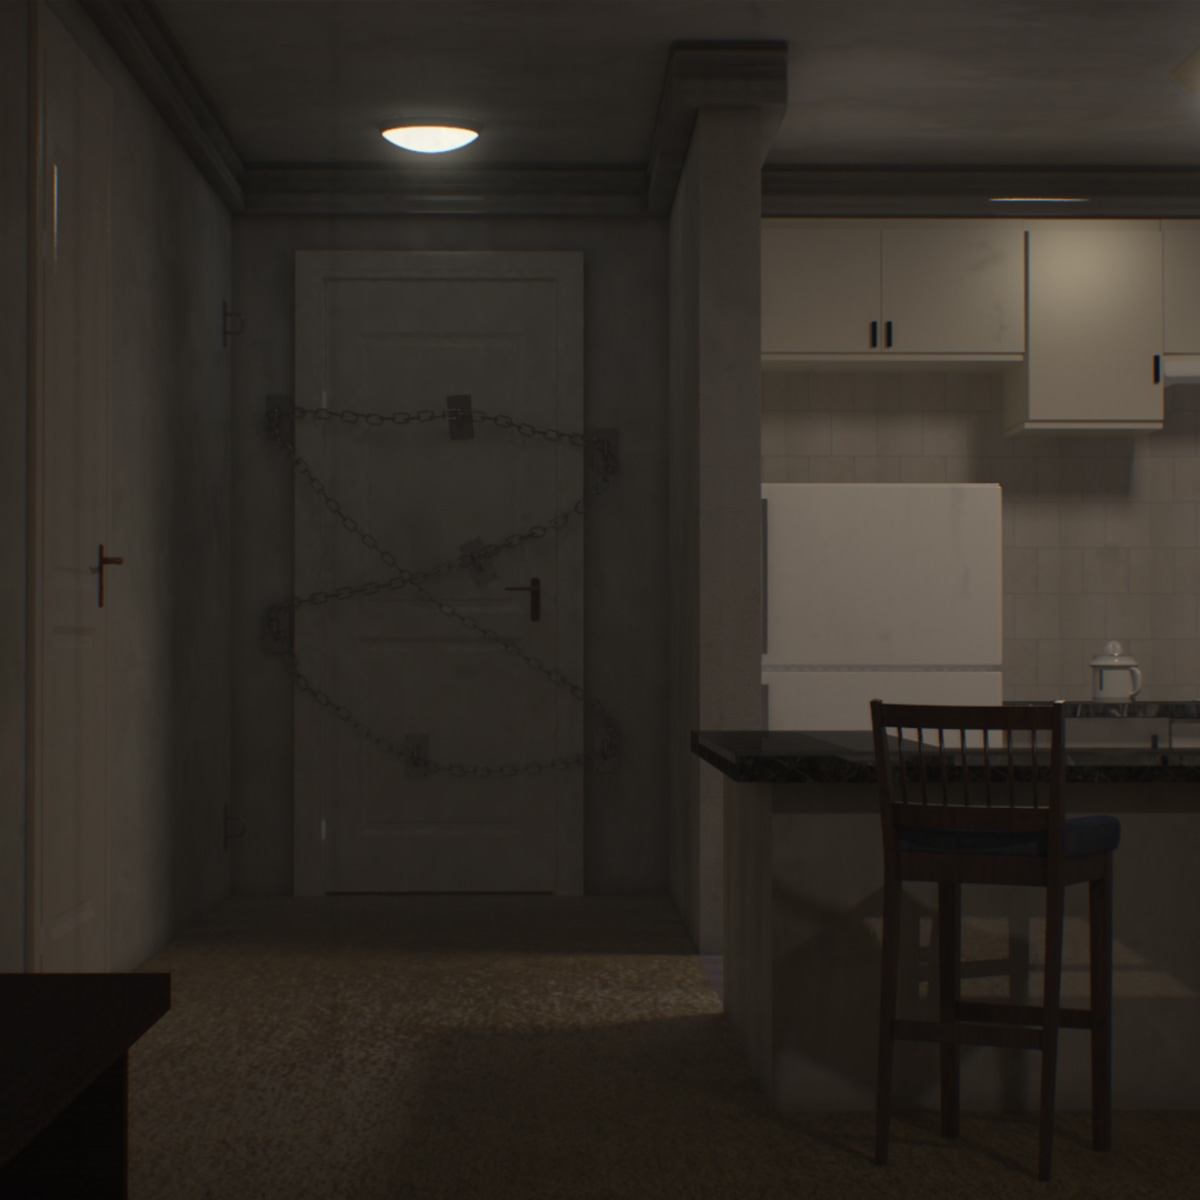 SILENT HILL 4: THE ROOM (PS5 CONCEPT) on Behance